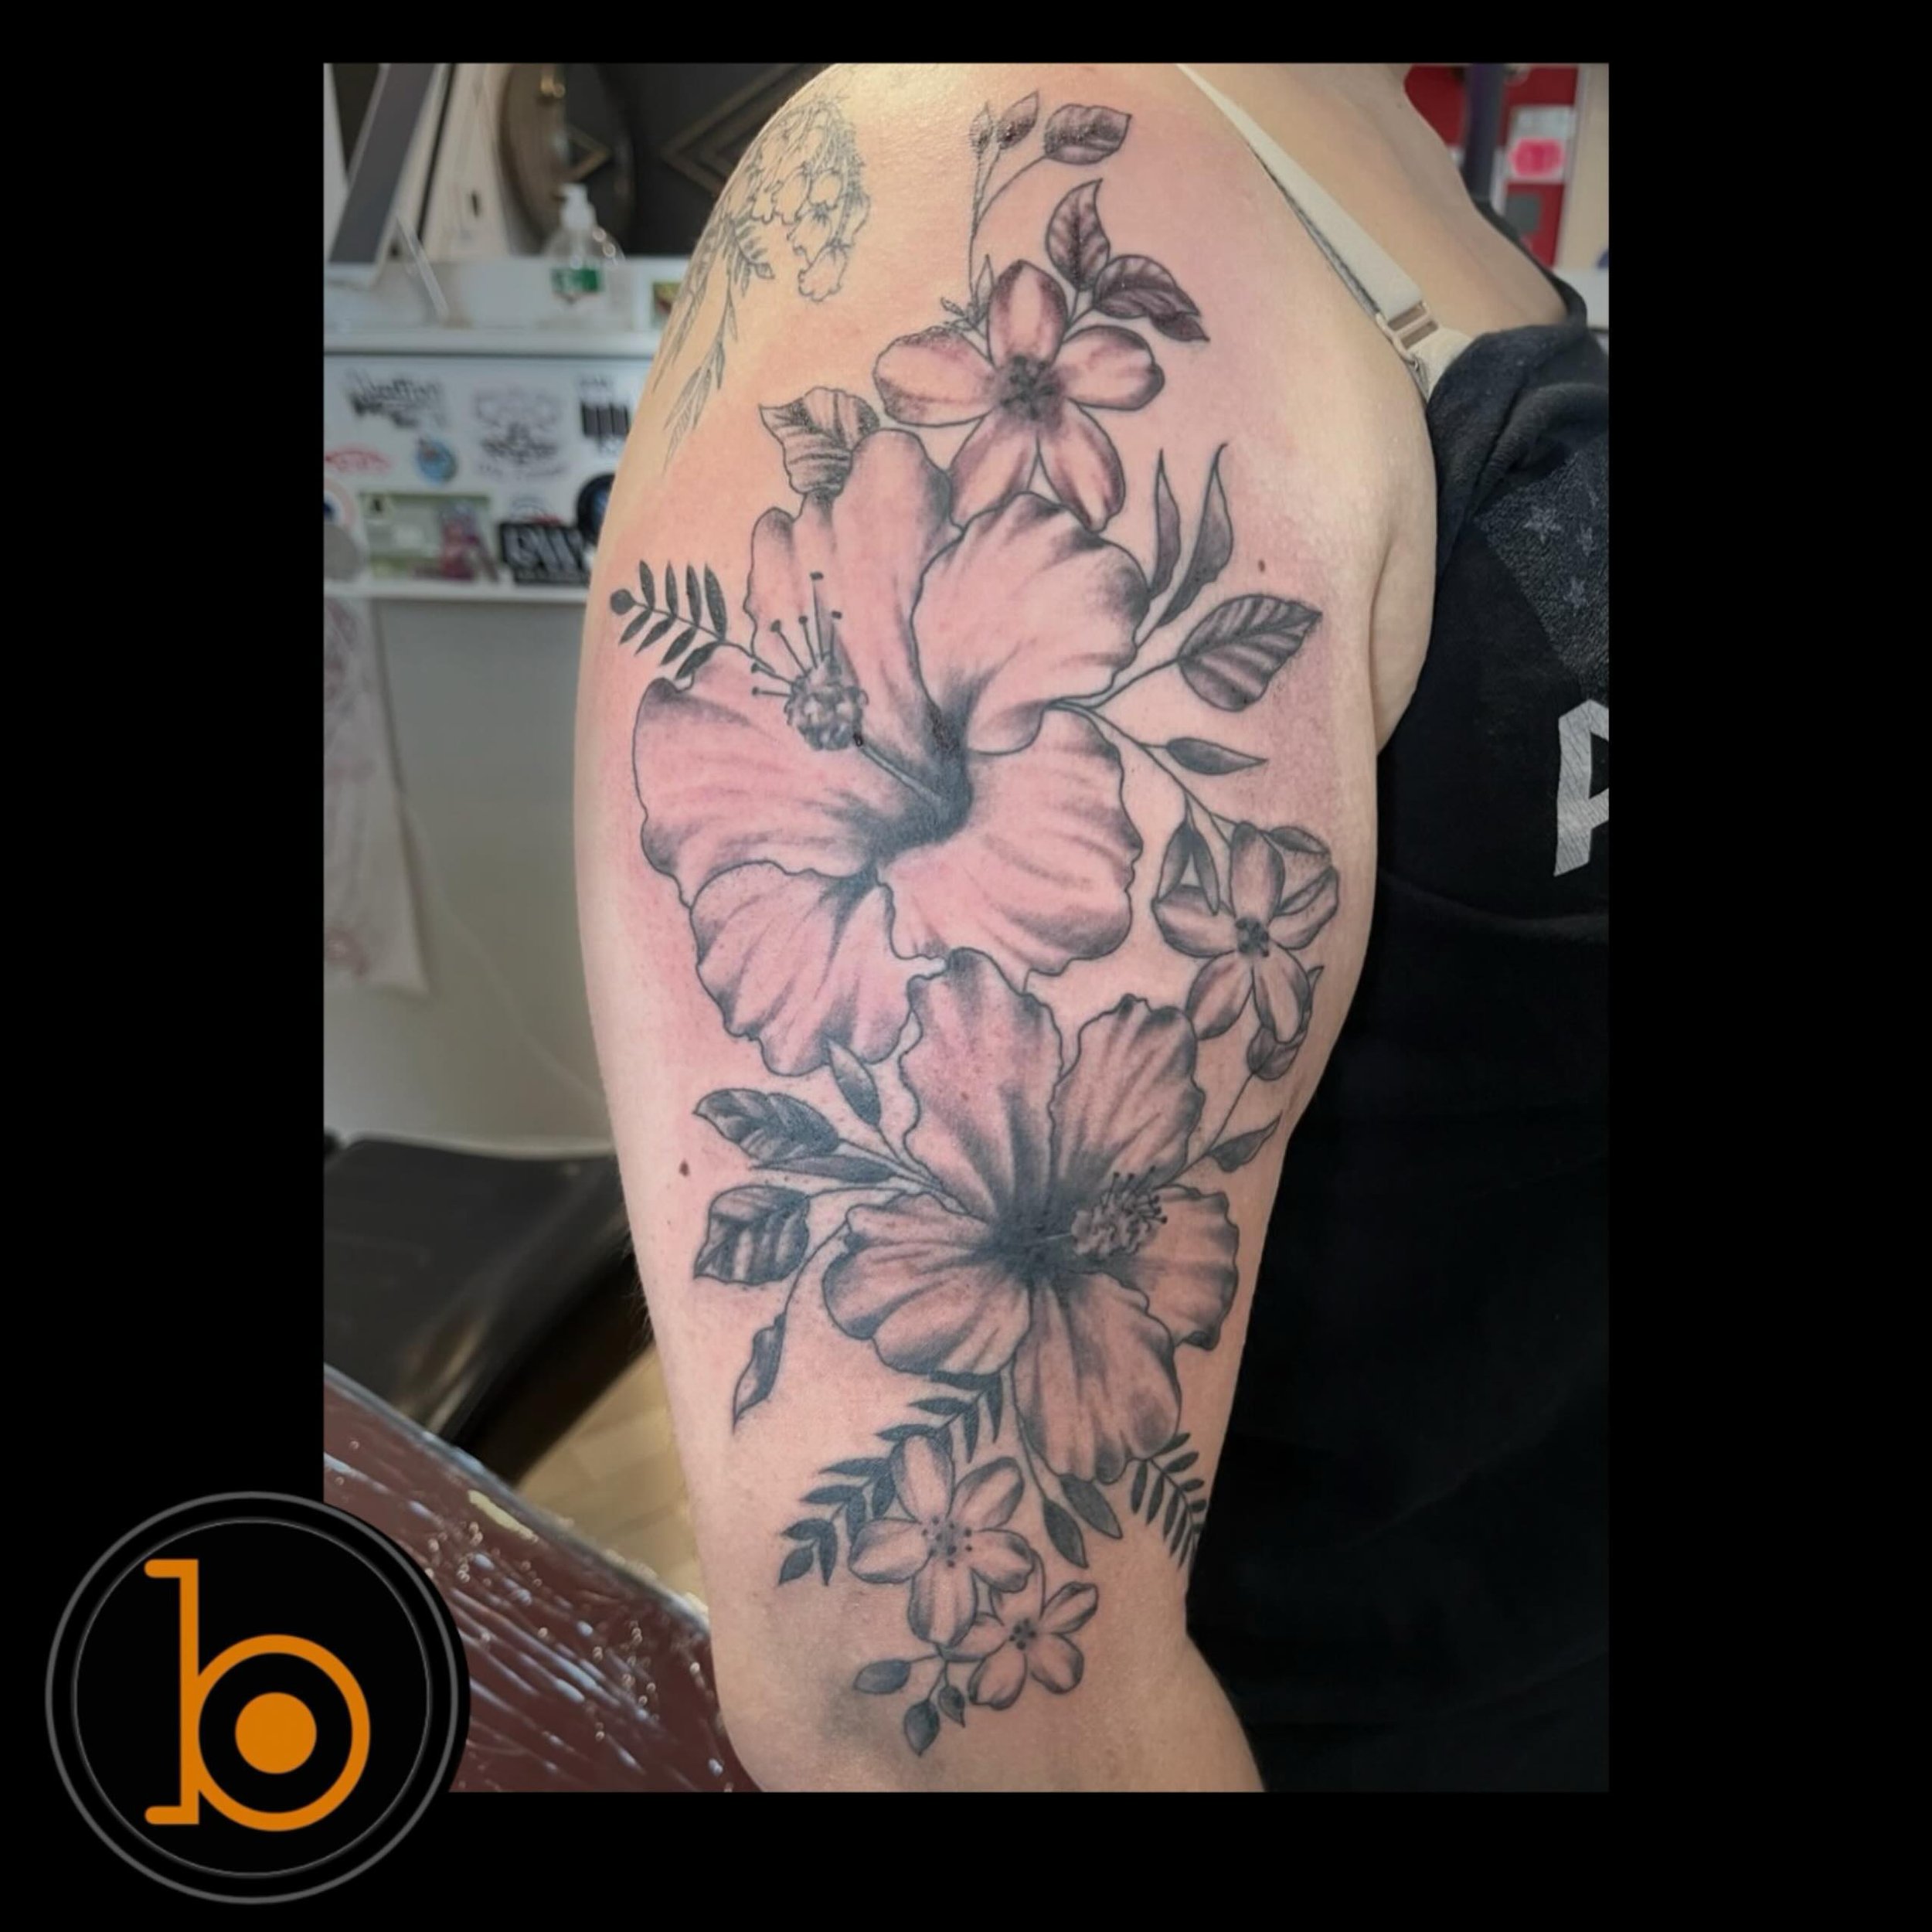 FLORALS FLORALS FLORALS! Another gorgeous tattoo by resident artist @slotapop 💐🌸
➖➖➖➖➖➖➖➖➖➖➖➖➖➖➖➖➖
Blueprint Gallery
138 Russell St
 Hadley MA 01035
📱(413)-387-0221 
WALK-INS WELCOME 
🕸️ www.blueprintgallery.com 🕸️
⬇️⬇️⬇️⬇️⬇️⬇️⬇️⬇️⬇️⬇️⬇️⬇️⬇️
Mad